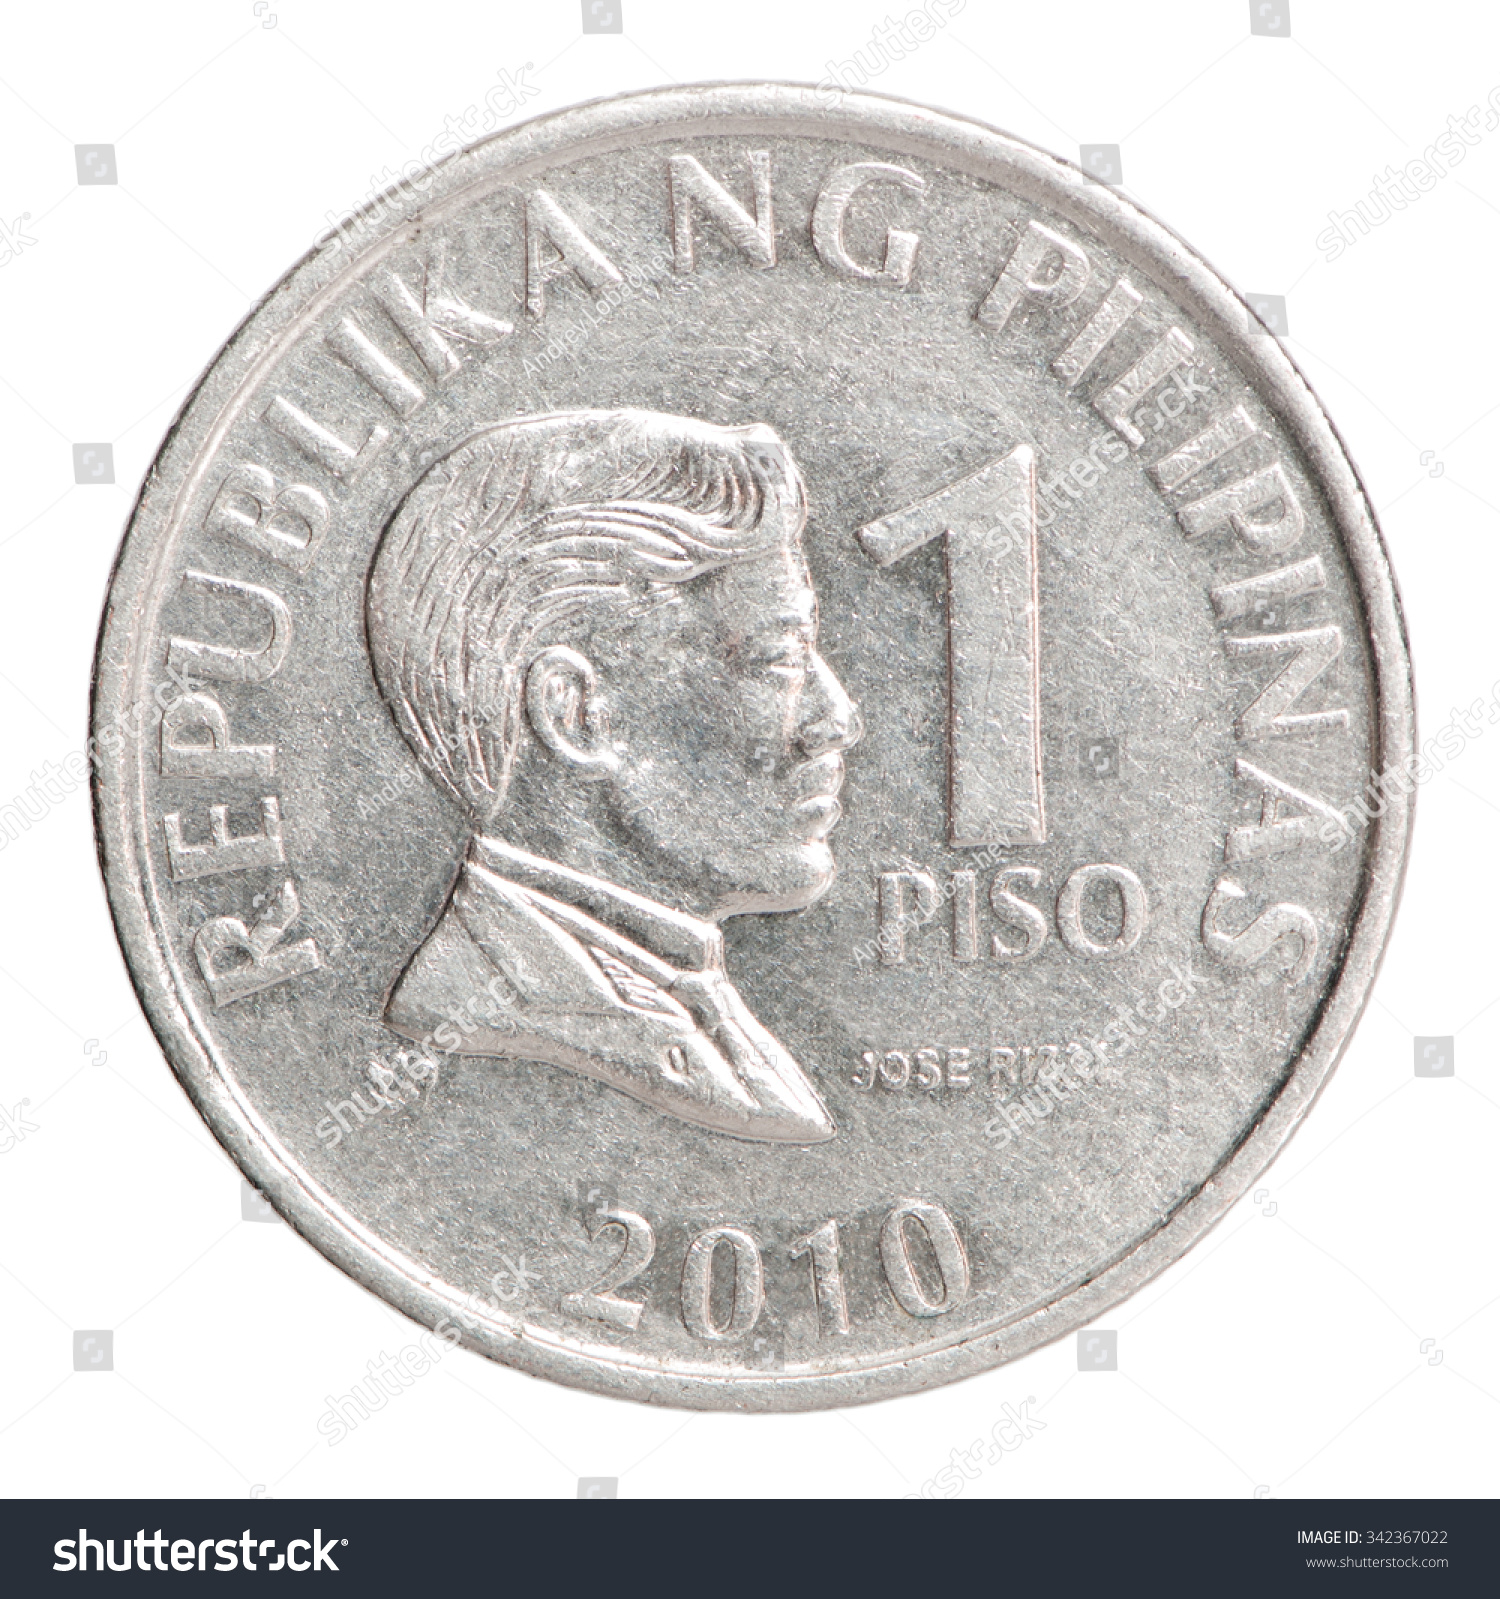 Philippine Peso Coins PNG - 72545